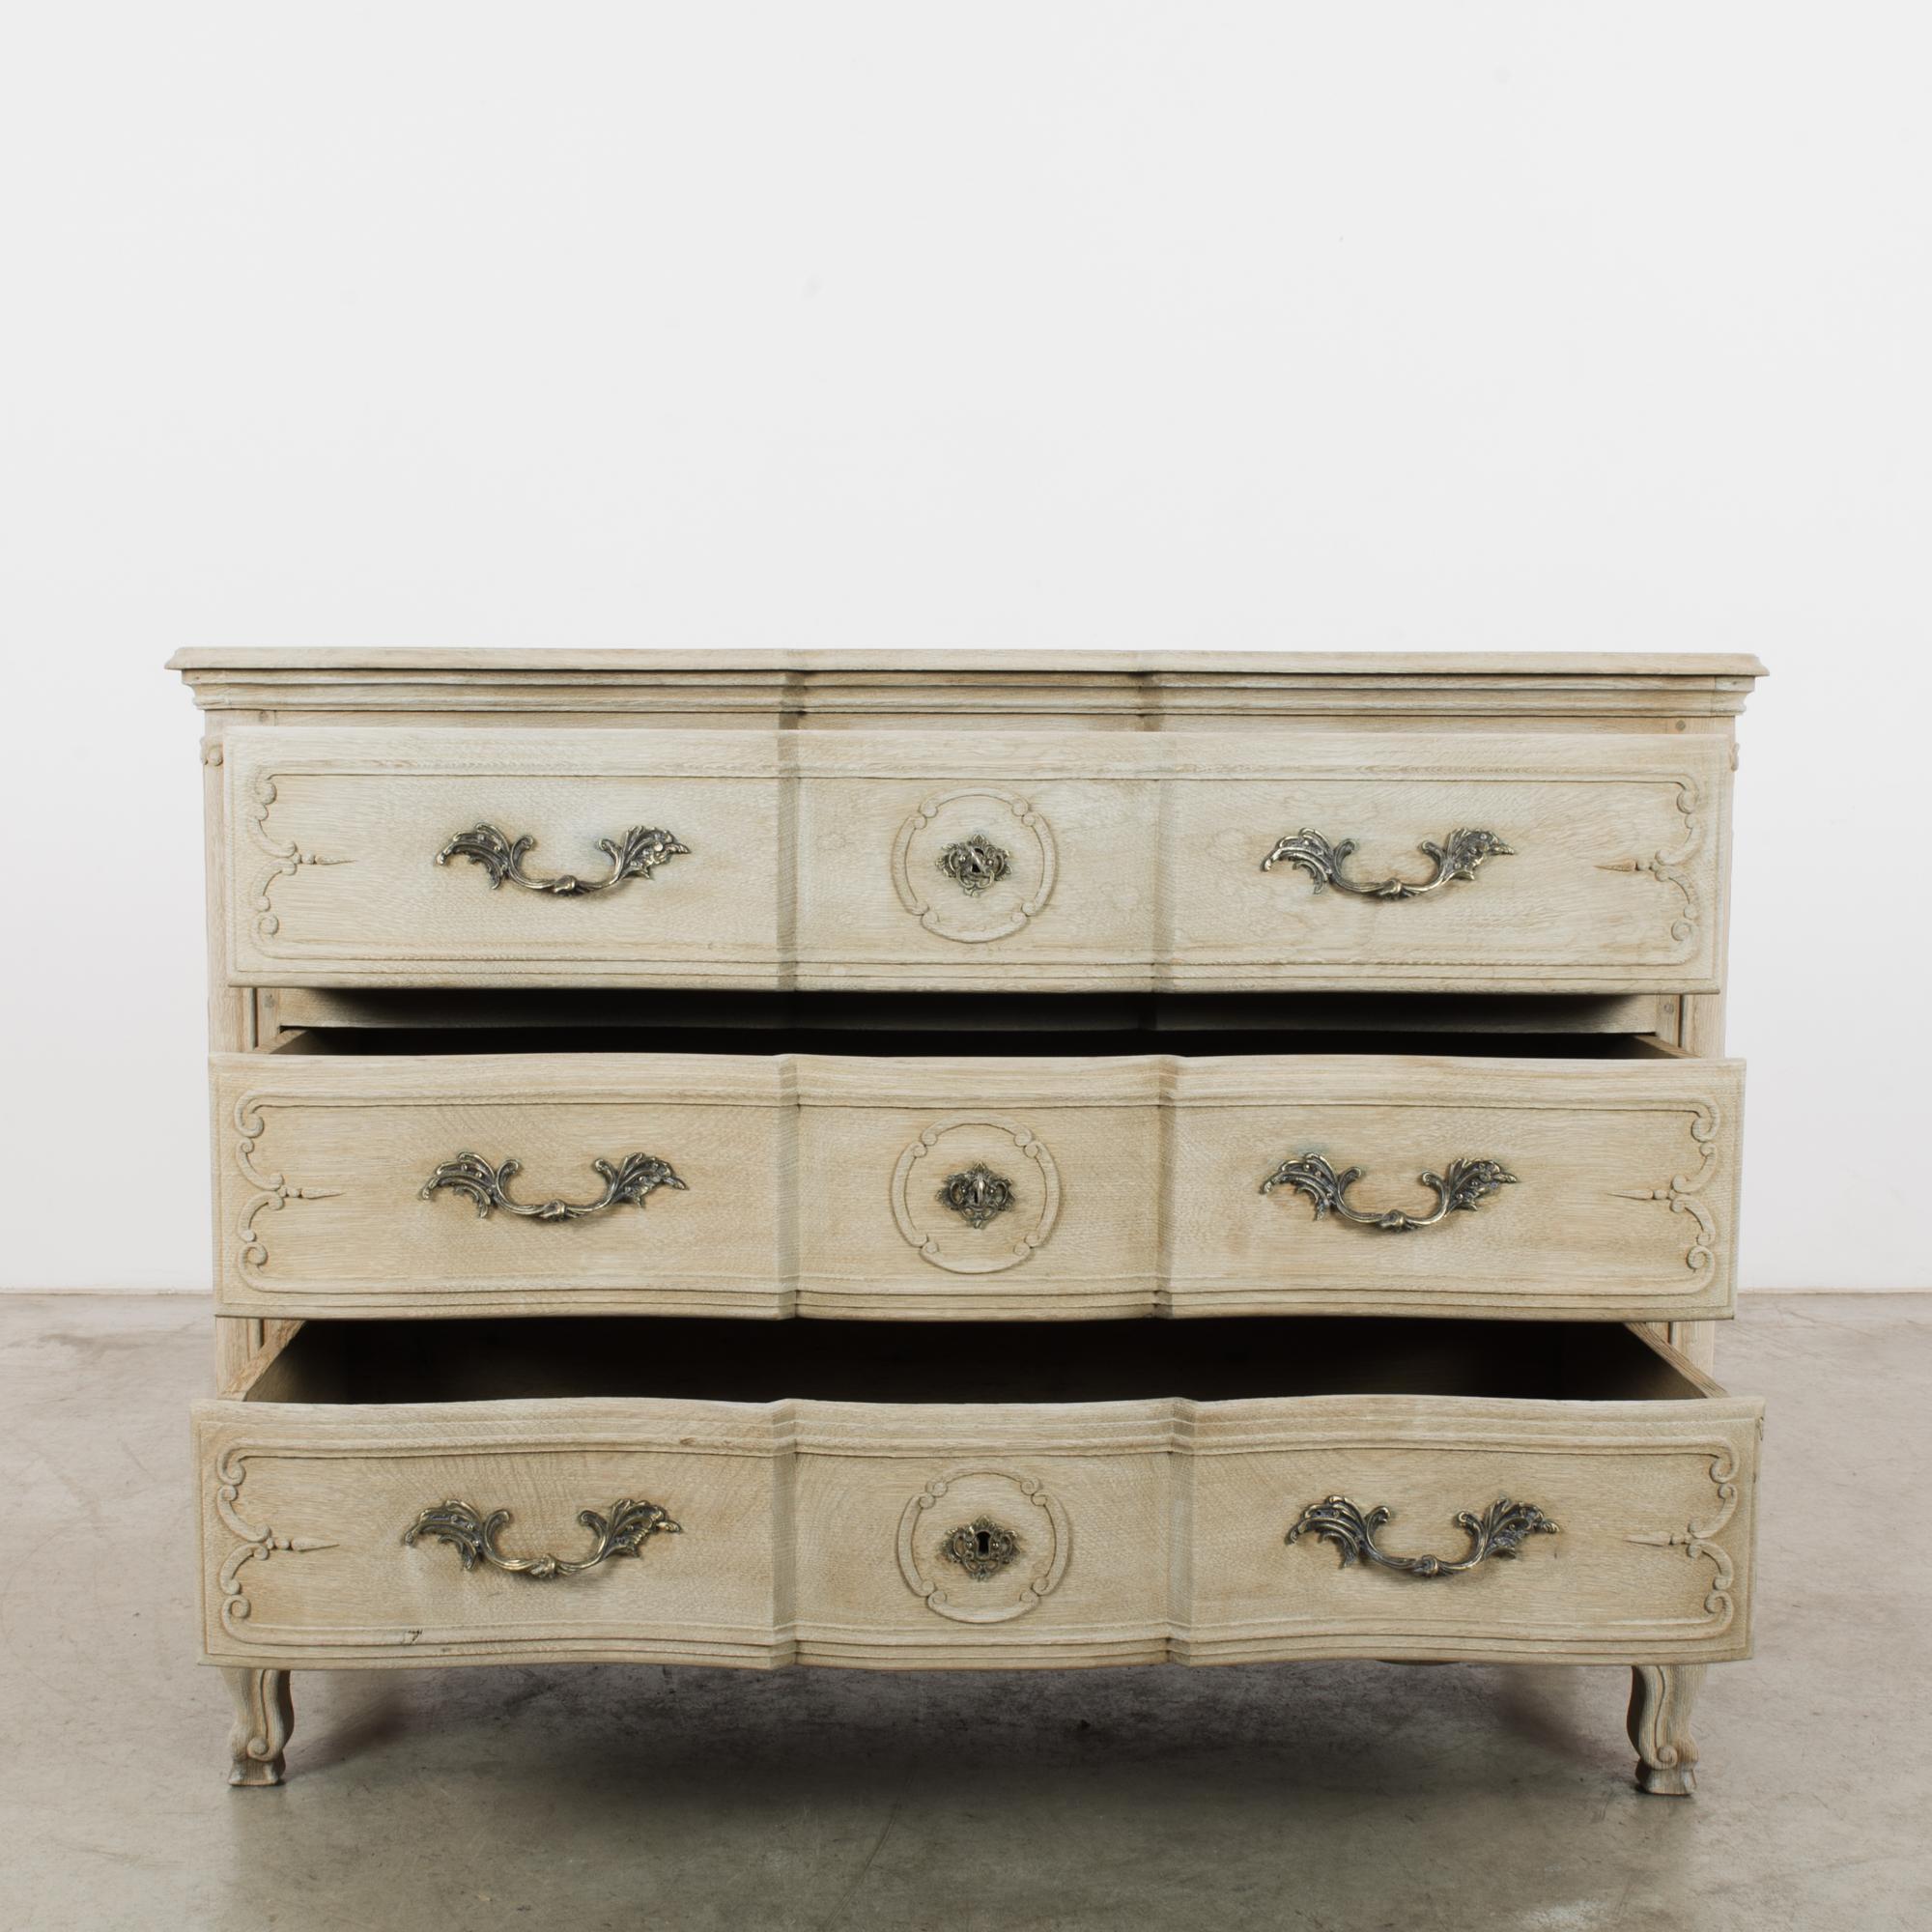 French Provincial Turn of the Century Belgian Oak Chest of Drawers